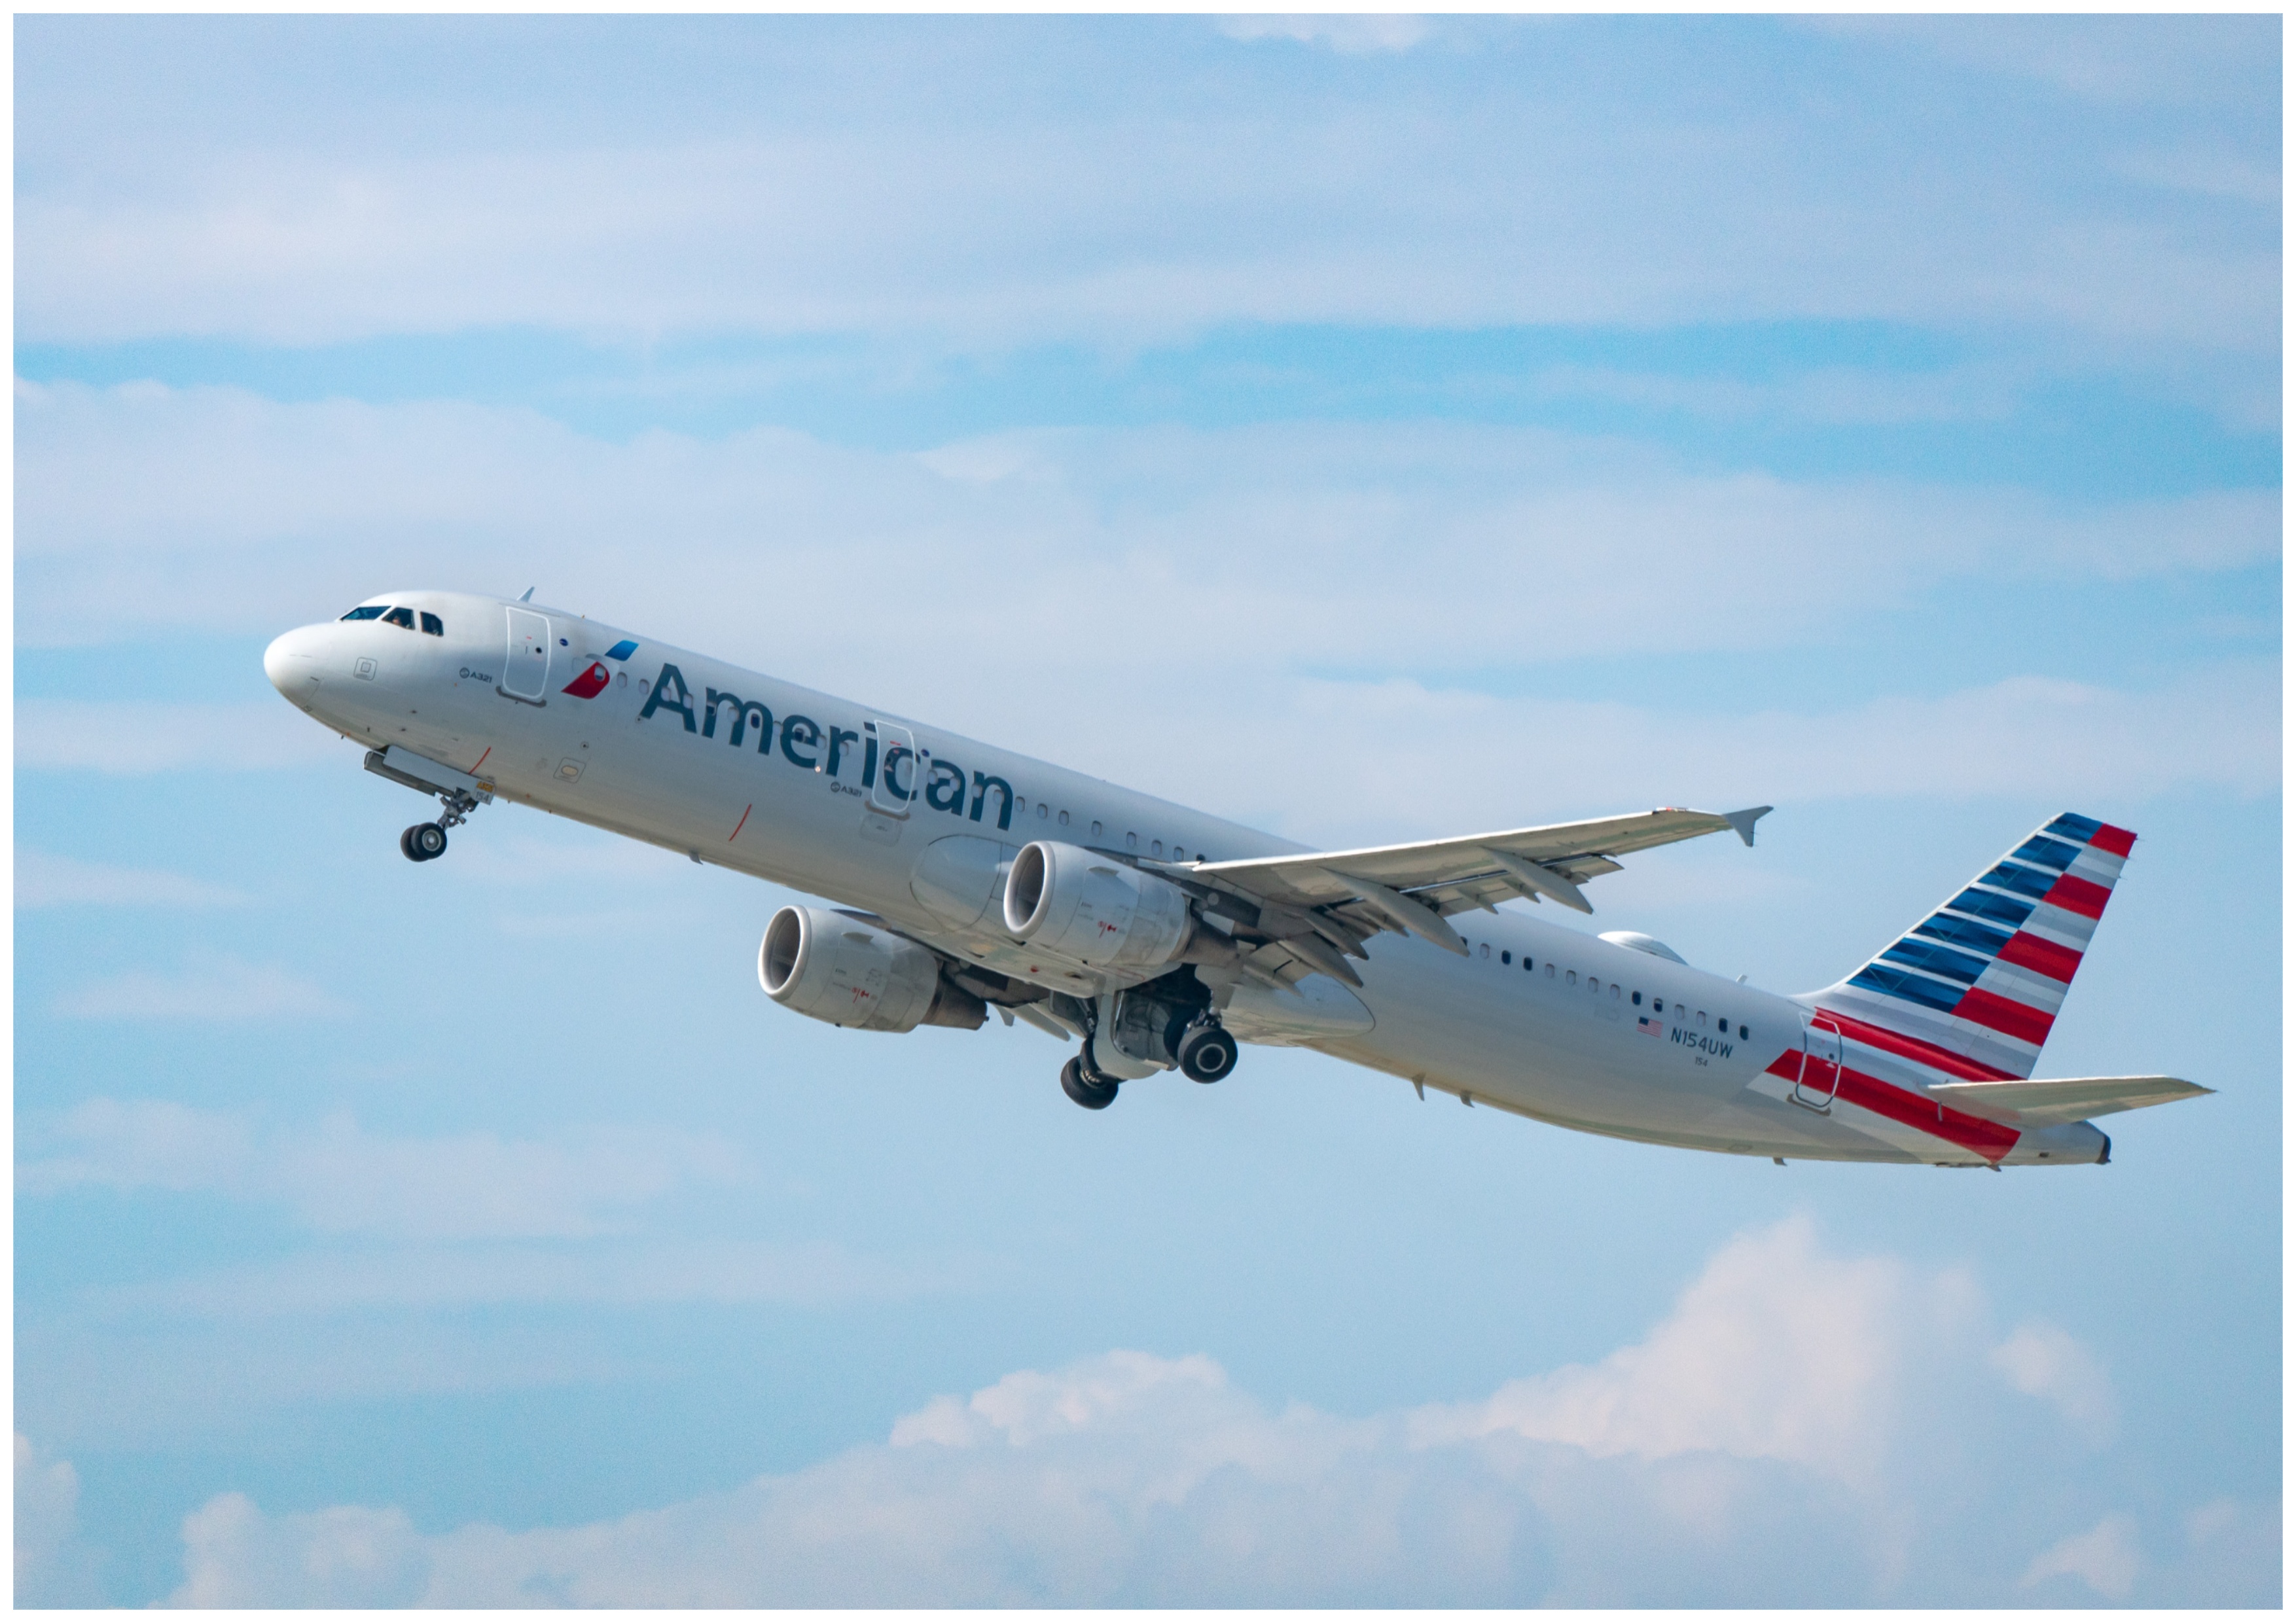 Teenage Girl Finds Hidden Camera on American Airlines Plane Toilet pic image